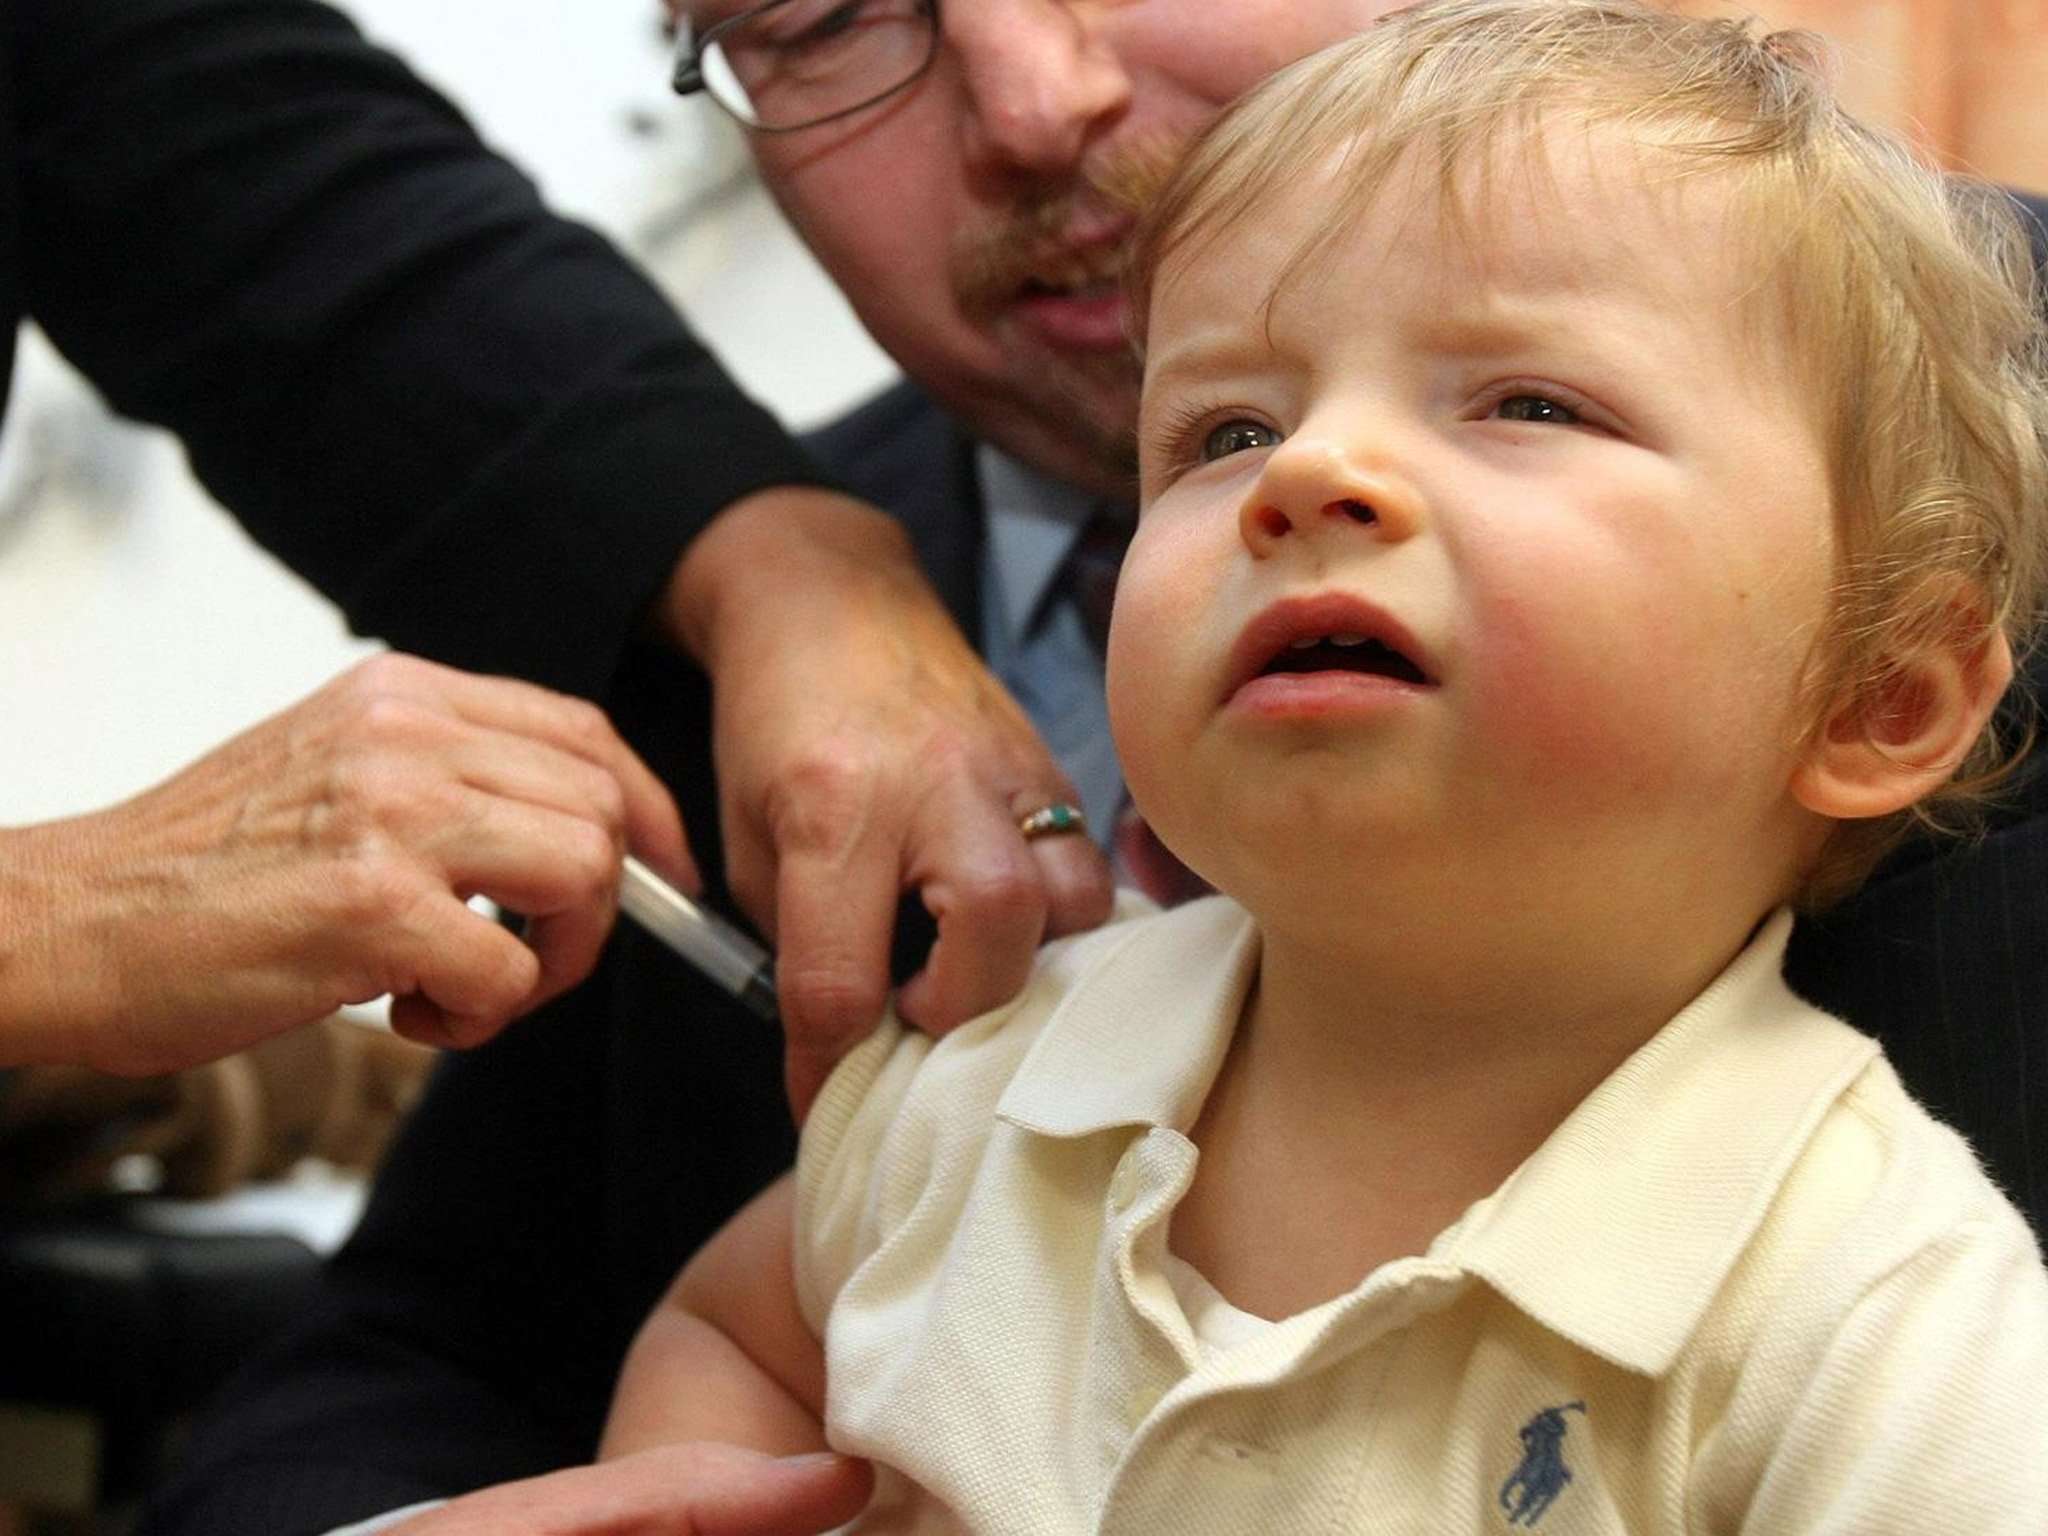 image for France to make vaccination mandatory from 2018 as it is 'unacceptable children are still dying of measles'